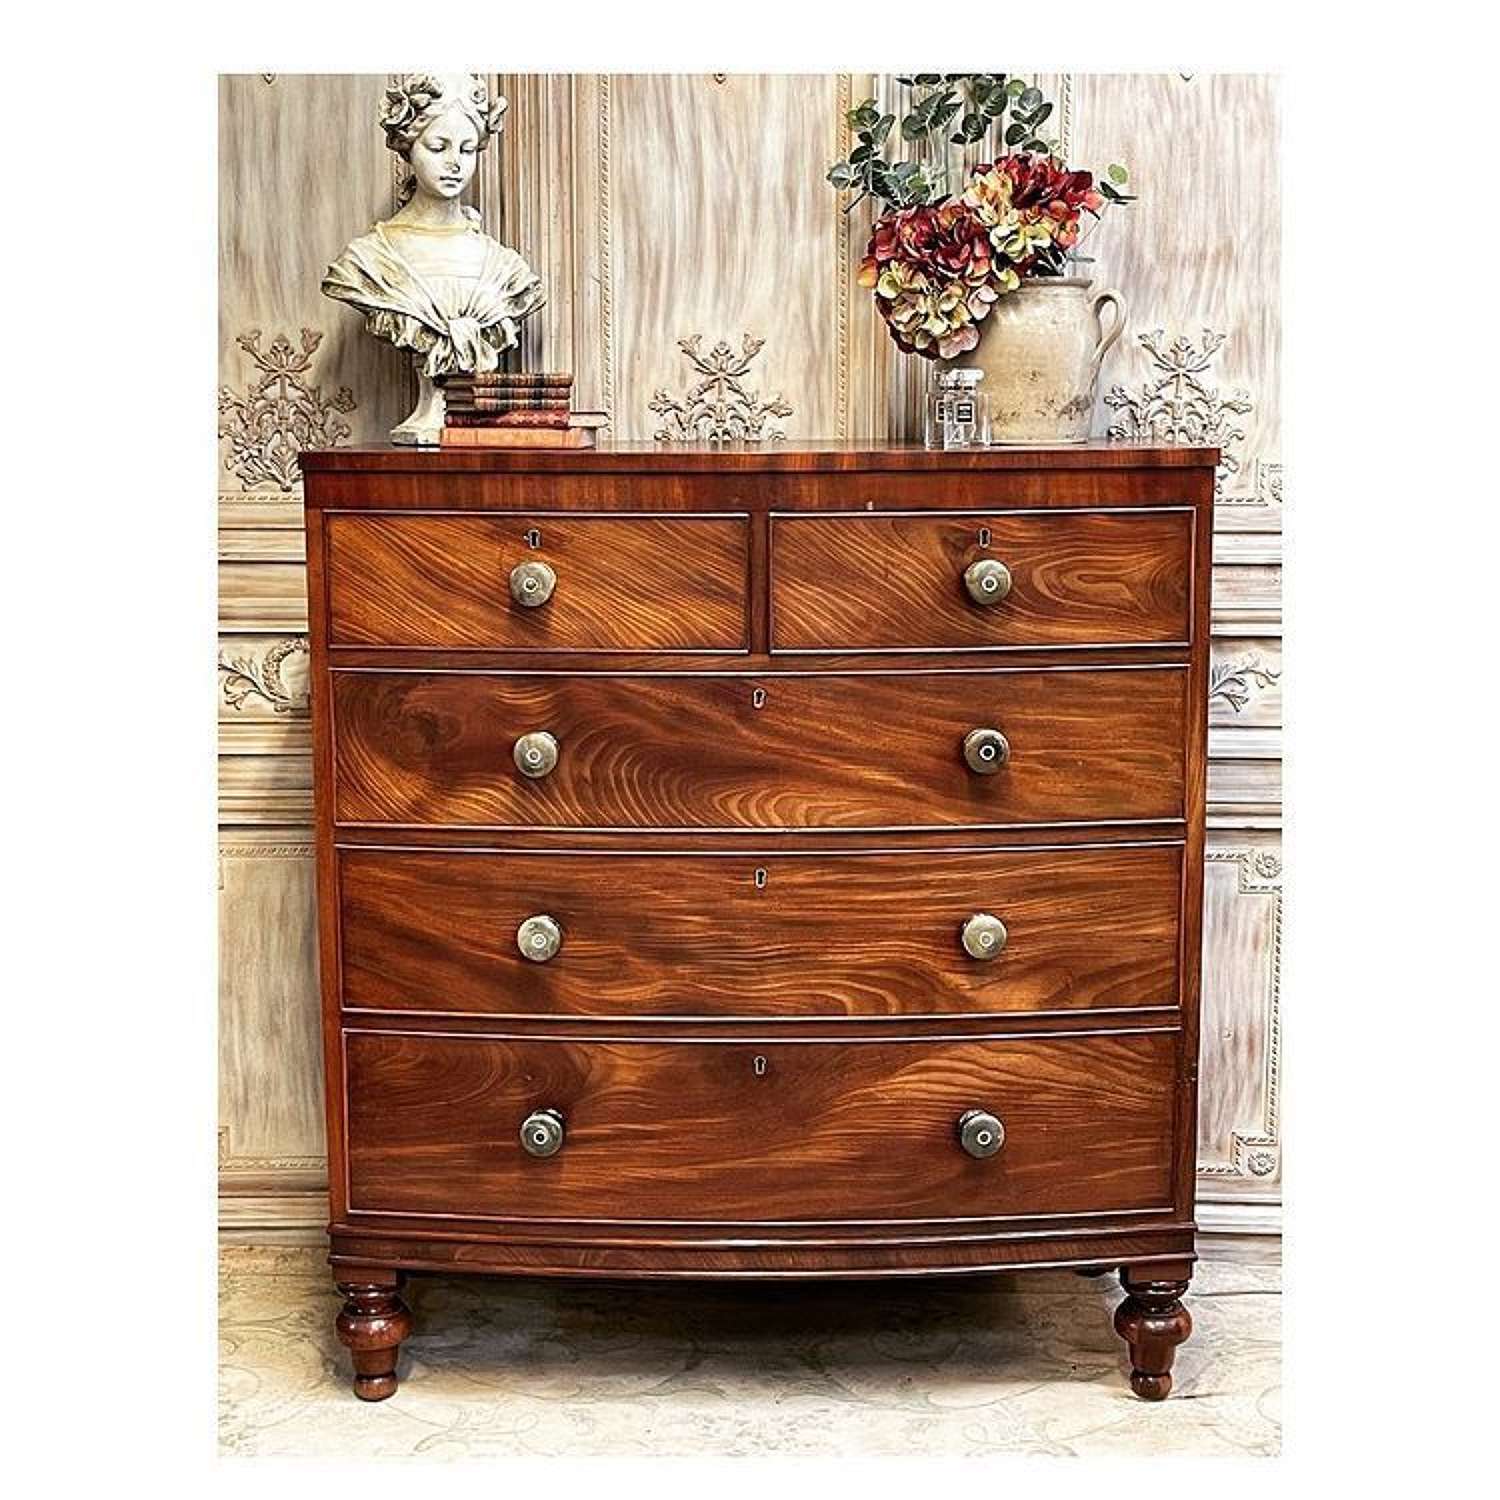 Mid Victorian chest of drawers